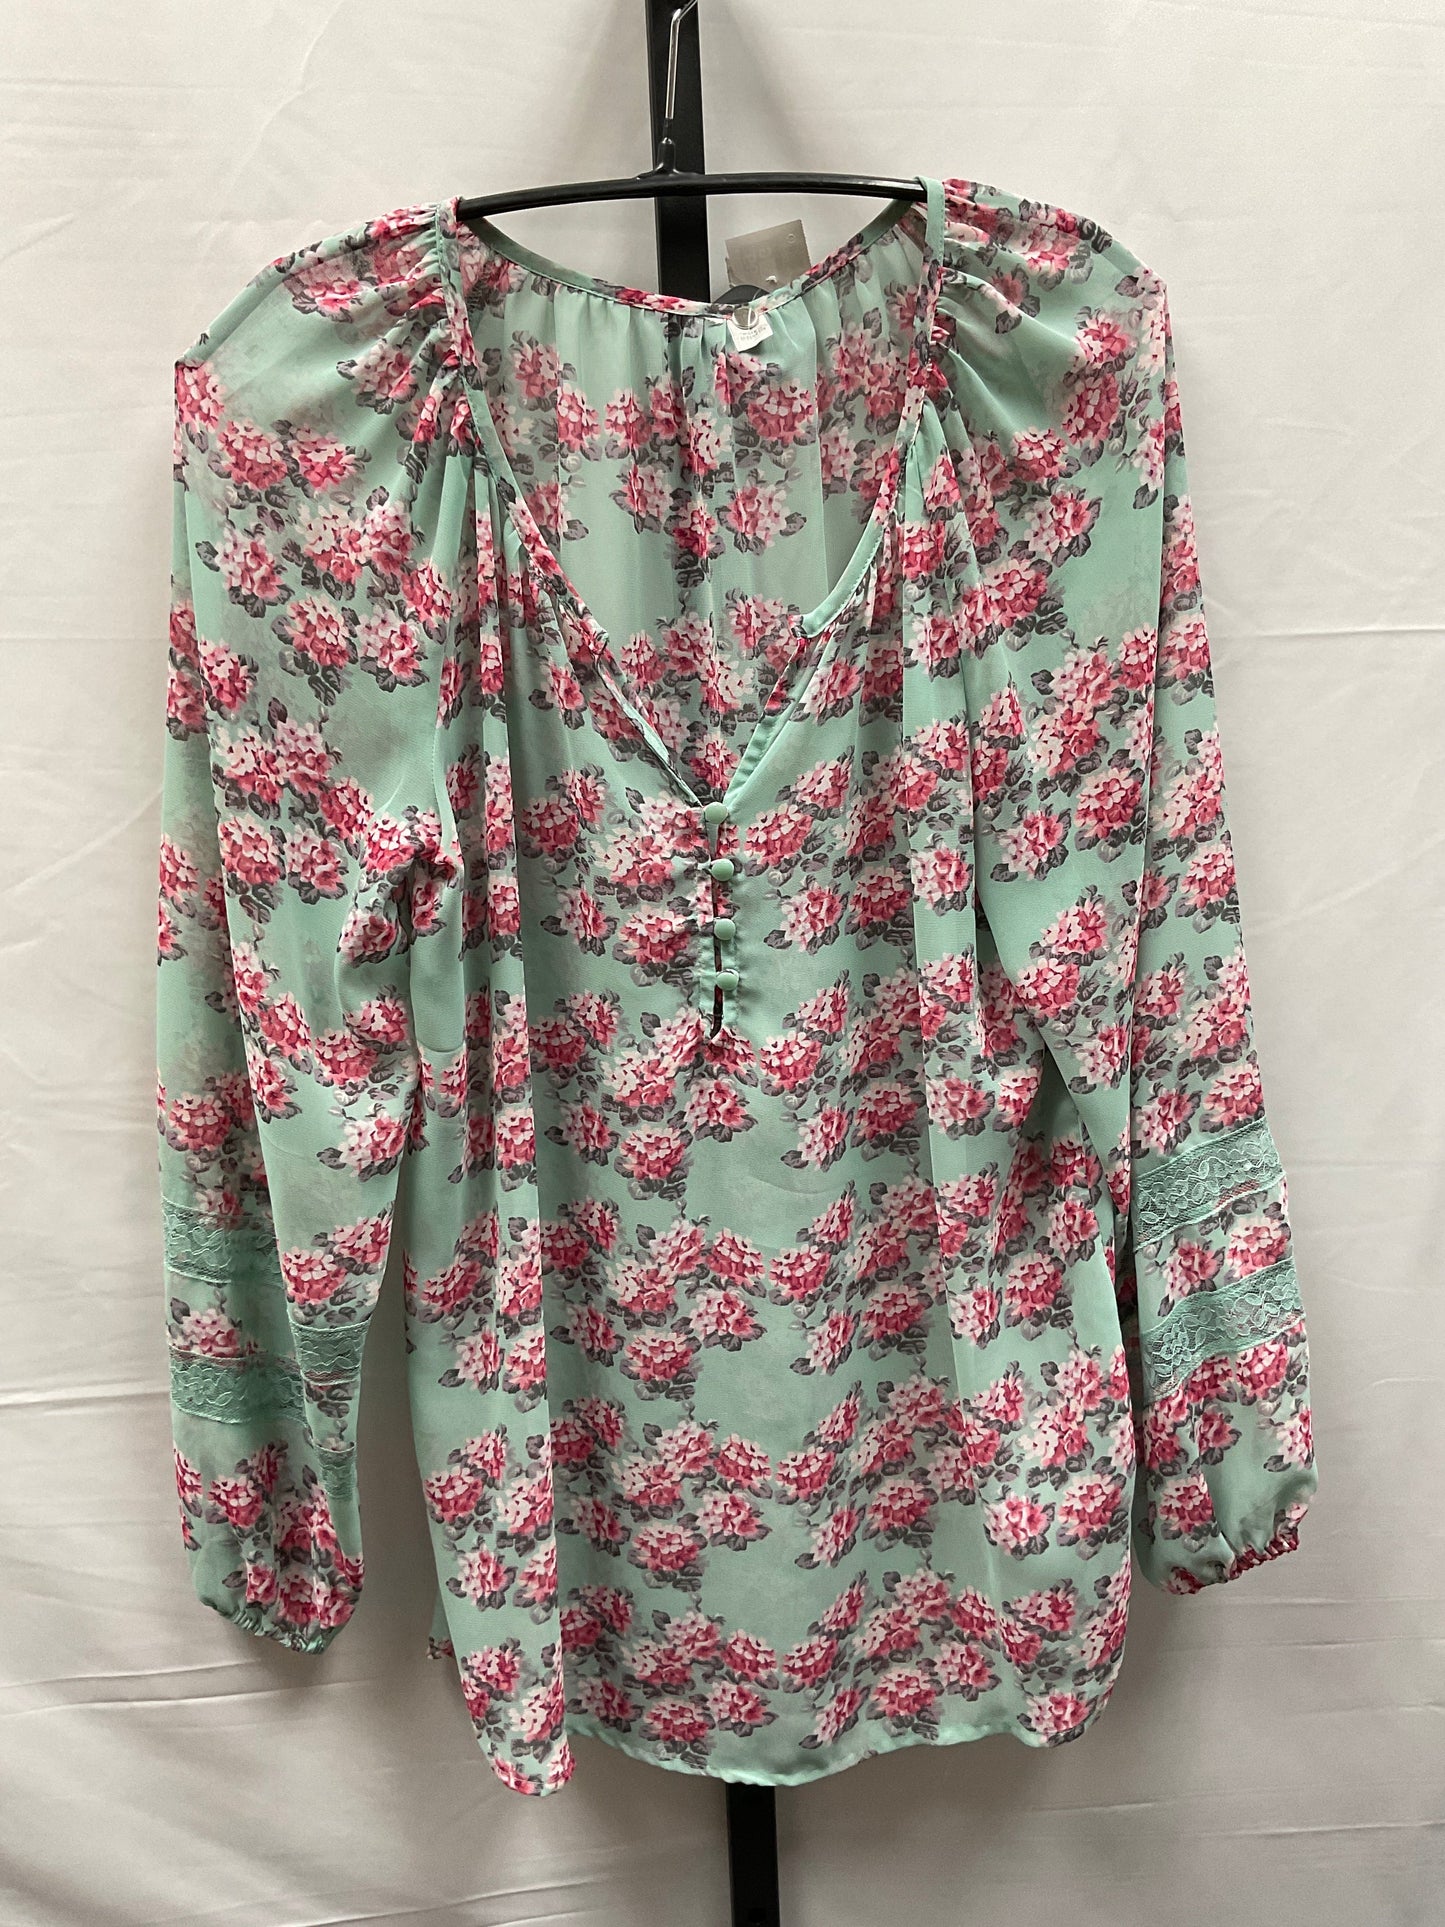 Floral Print Top Long Sleeve Clothes Mentor, Size S